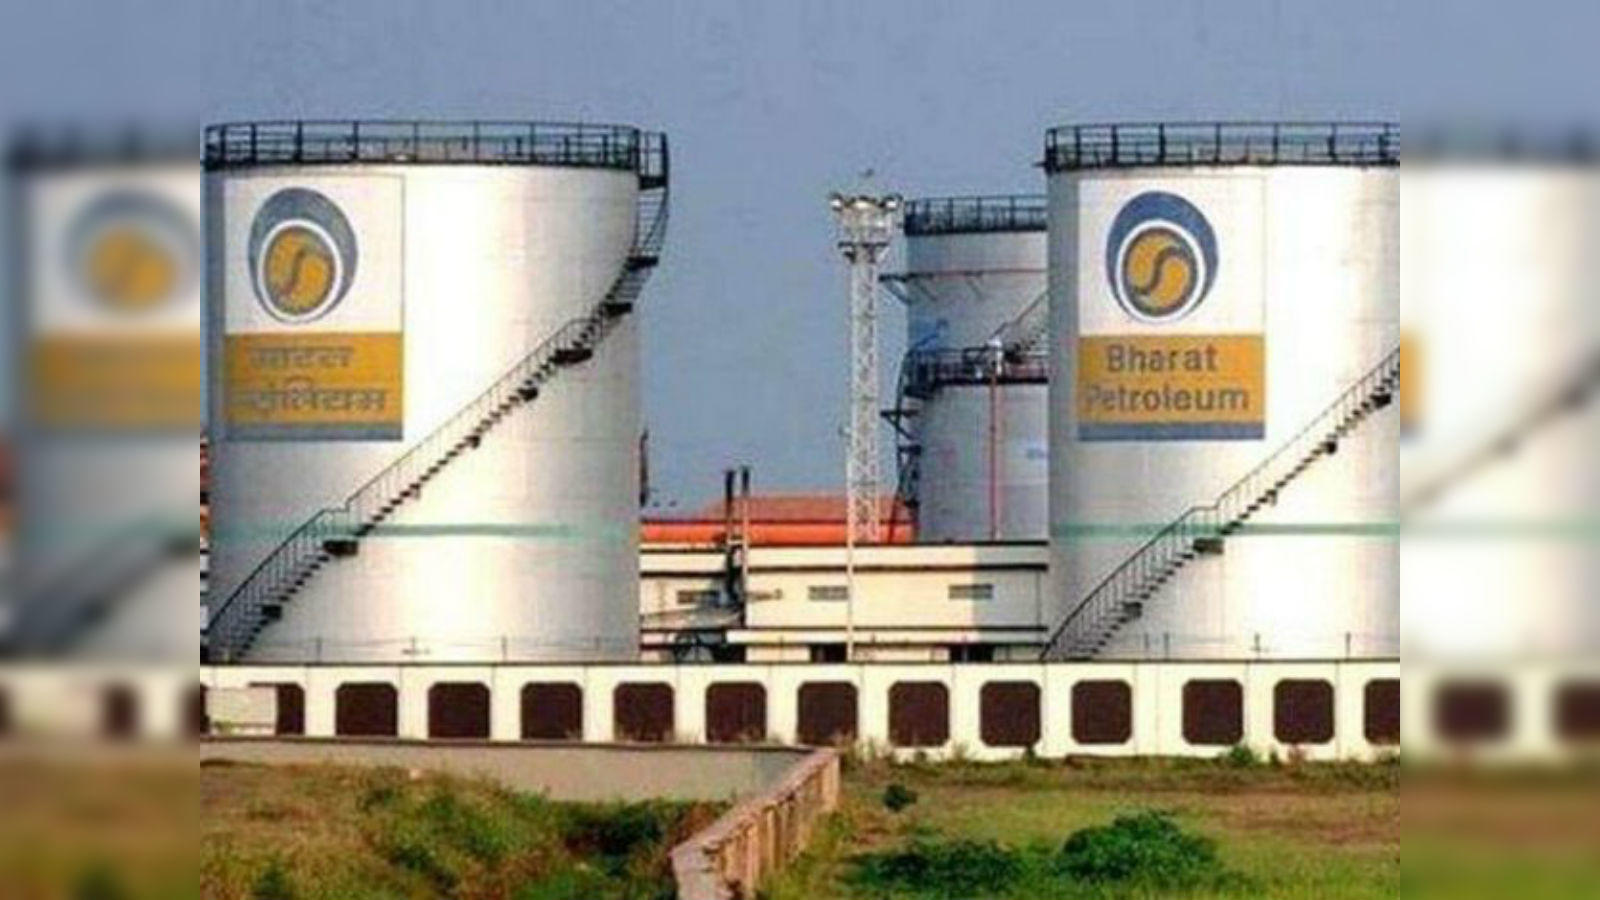 Now BPCL's small - Bharat Petroleum Corporation Limited